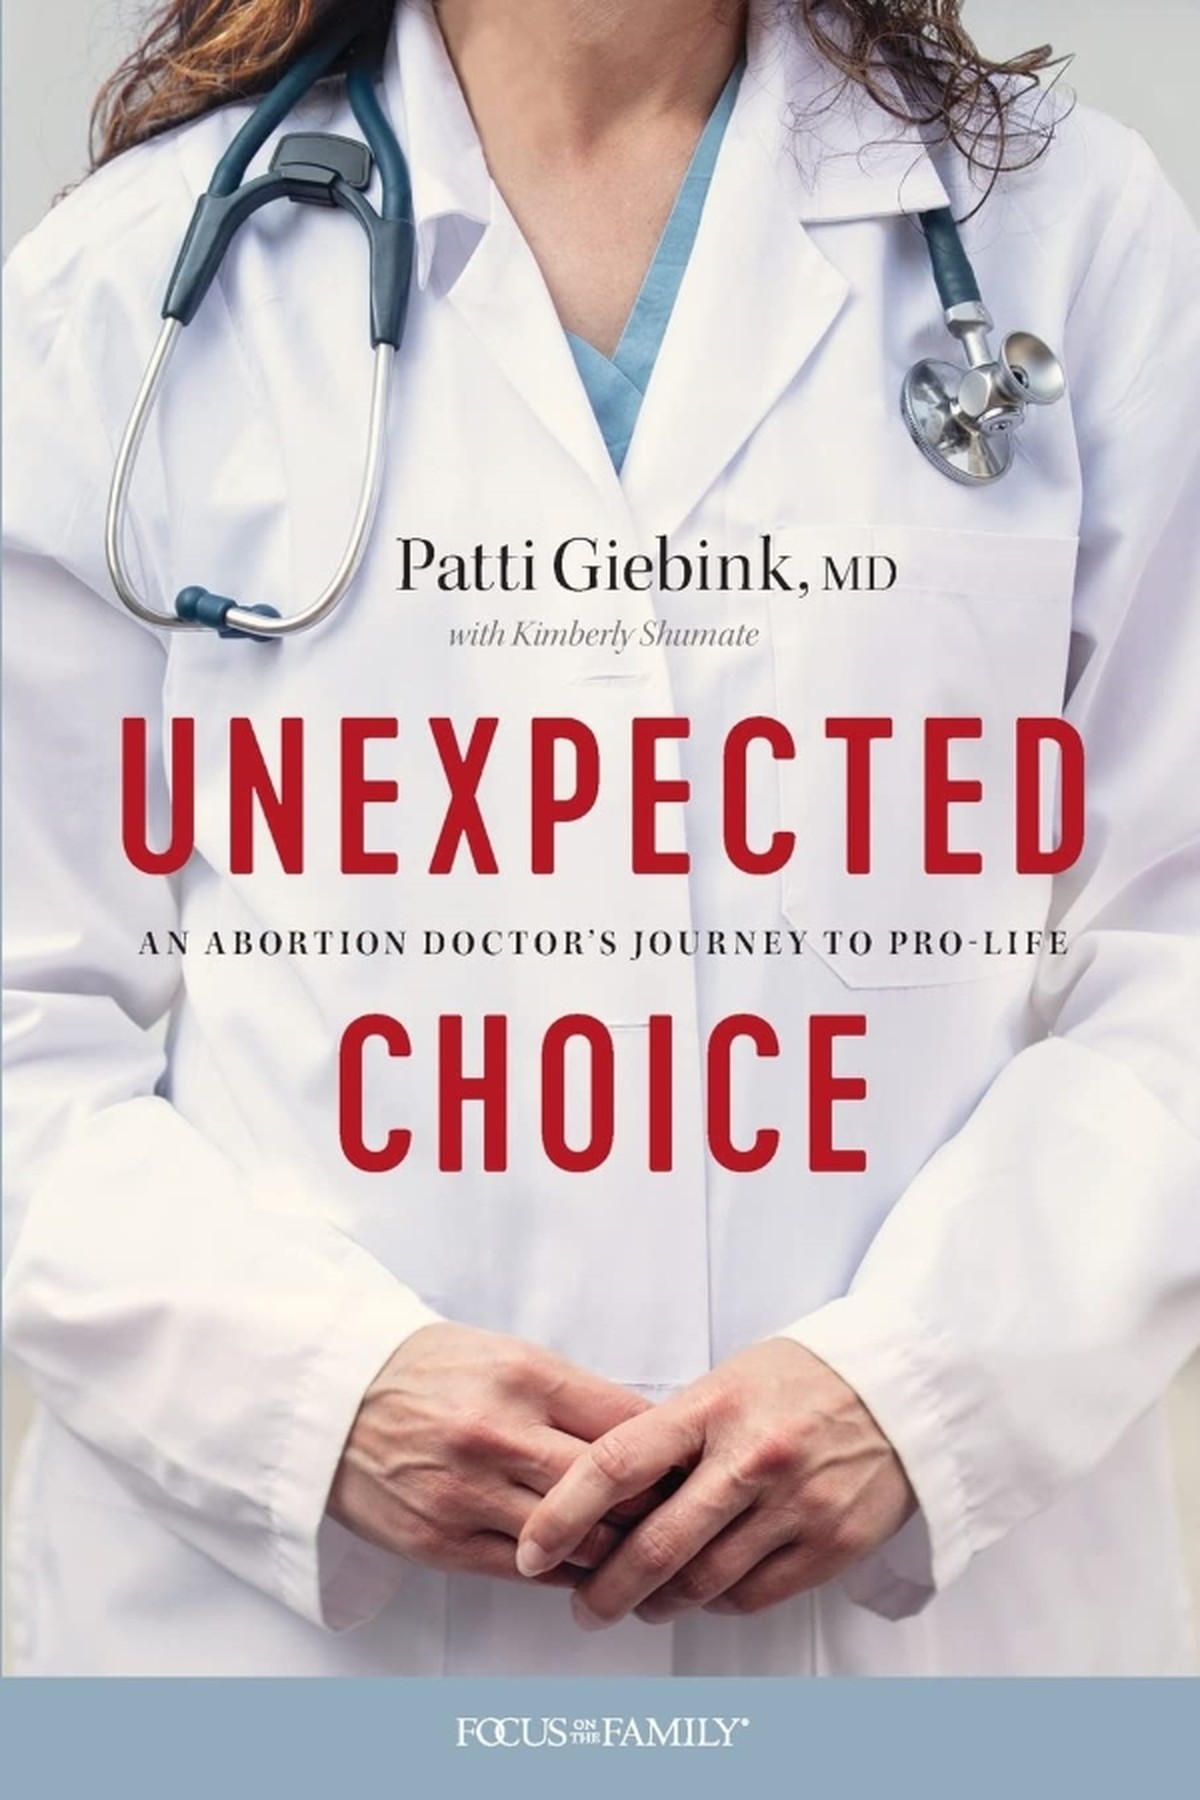 3. An Unexpected Choice by Patti Giebink